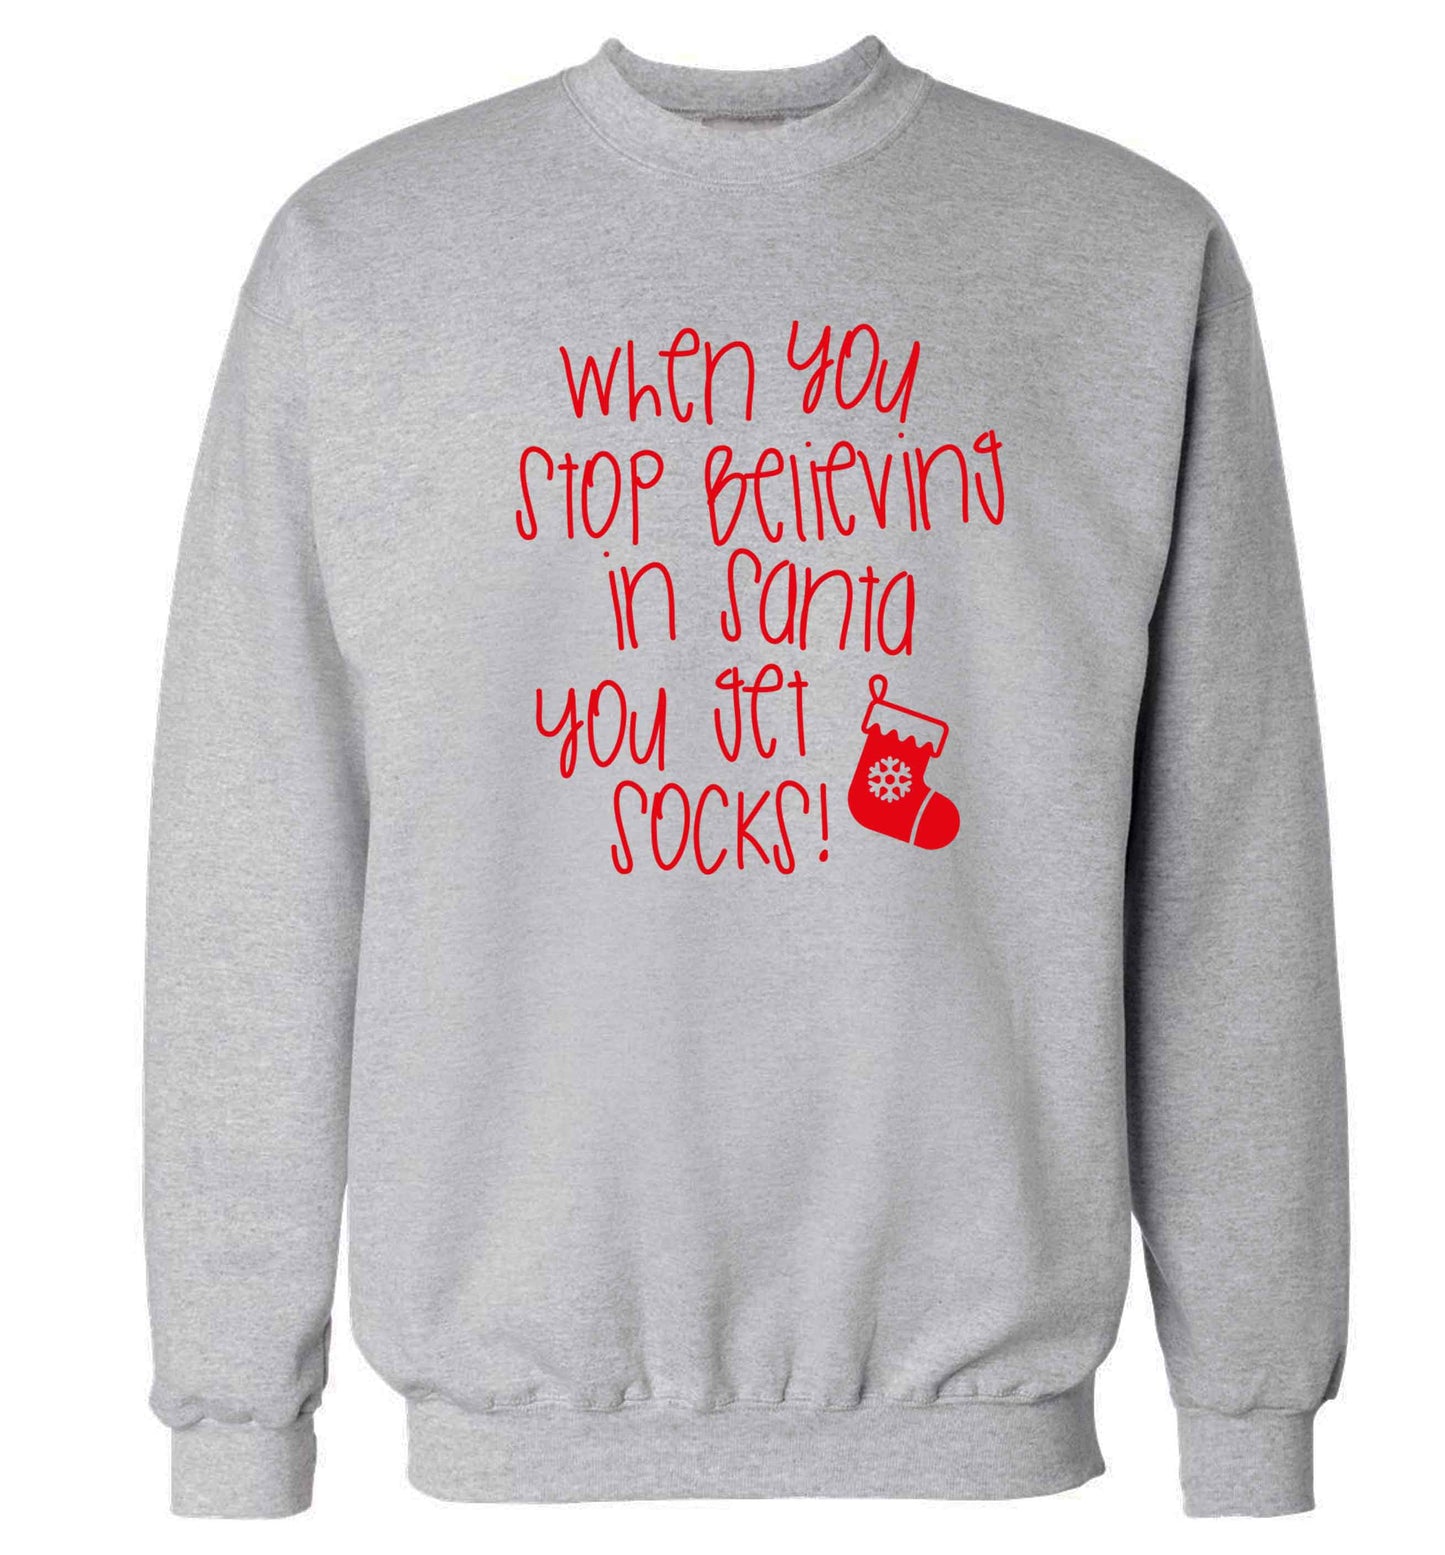 When you stop believing in santa you get socks Adult's unisex grey Sweater 2XL